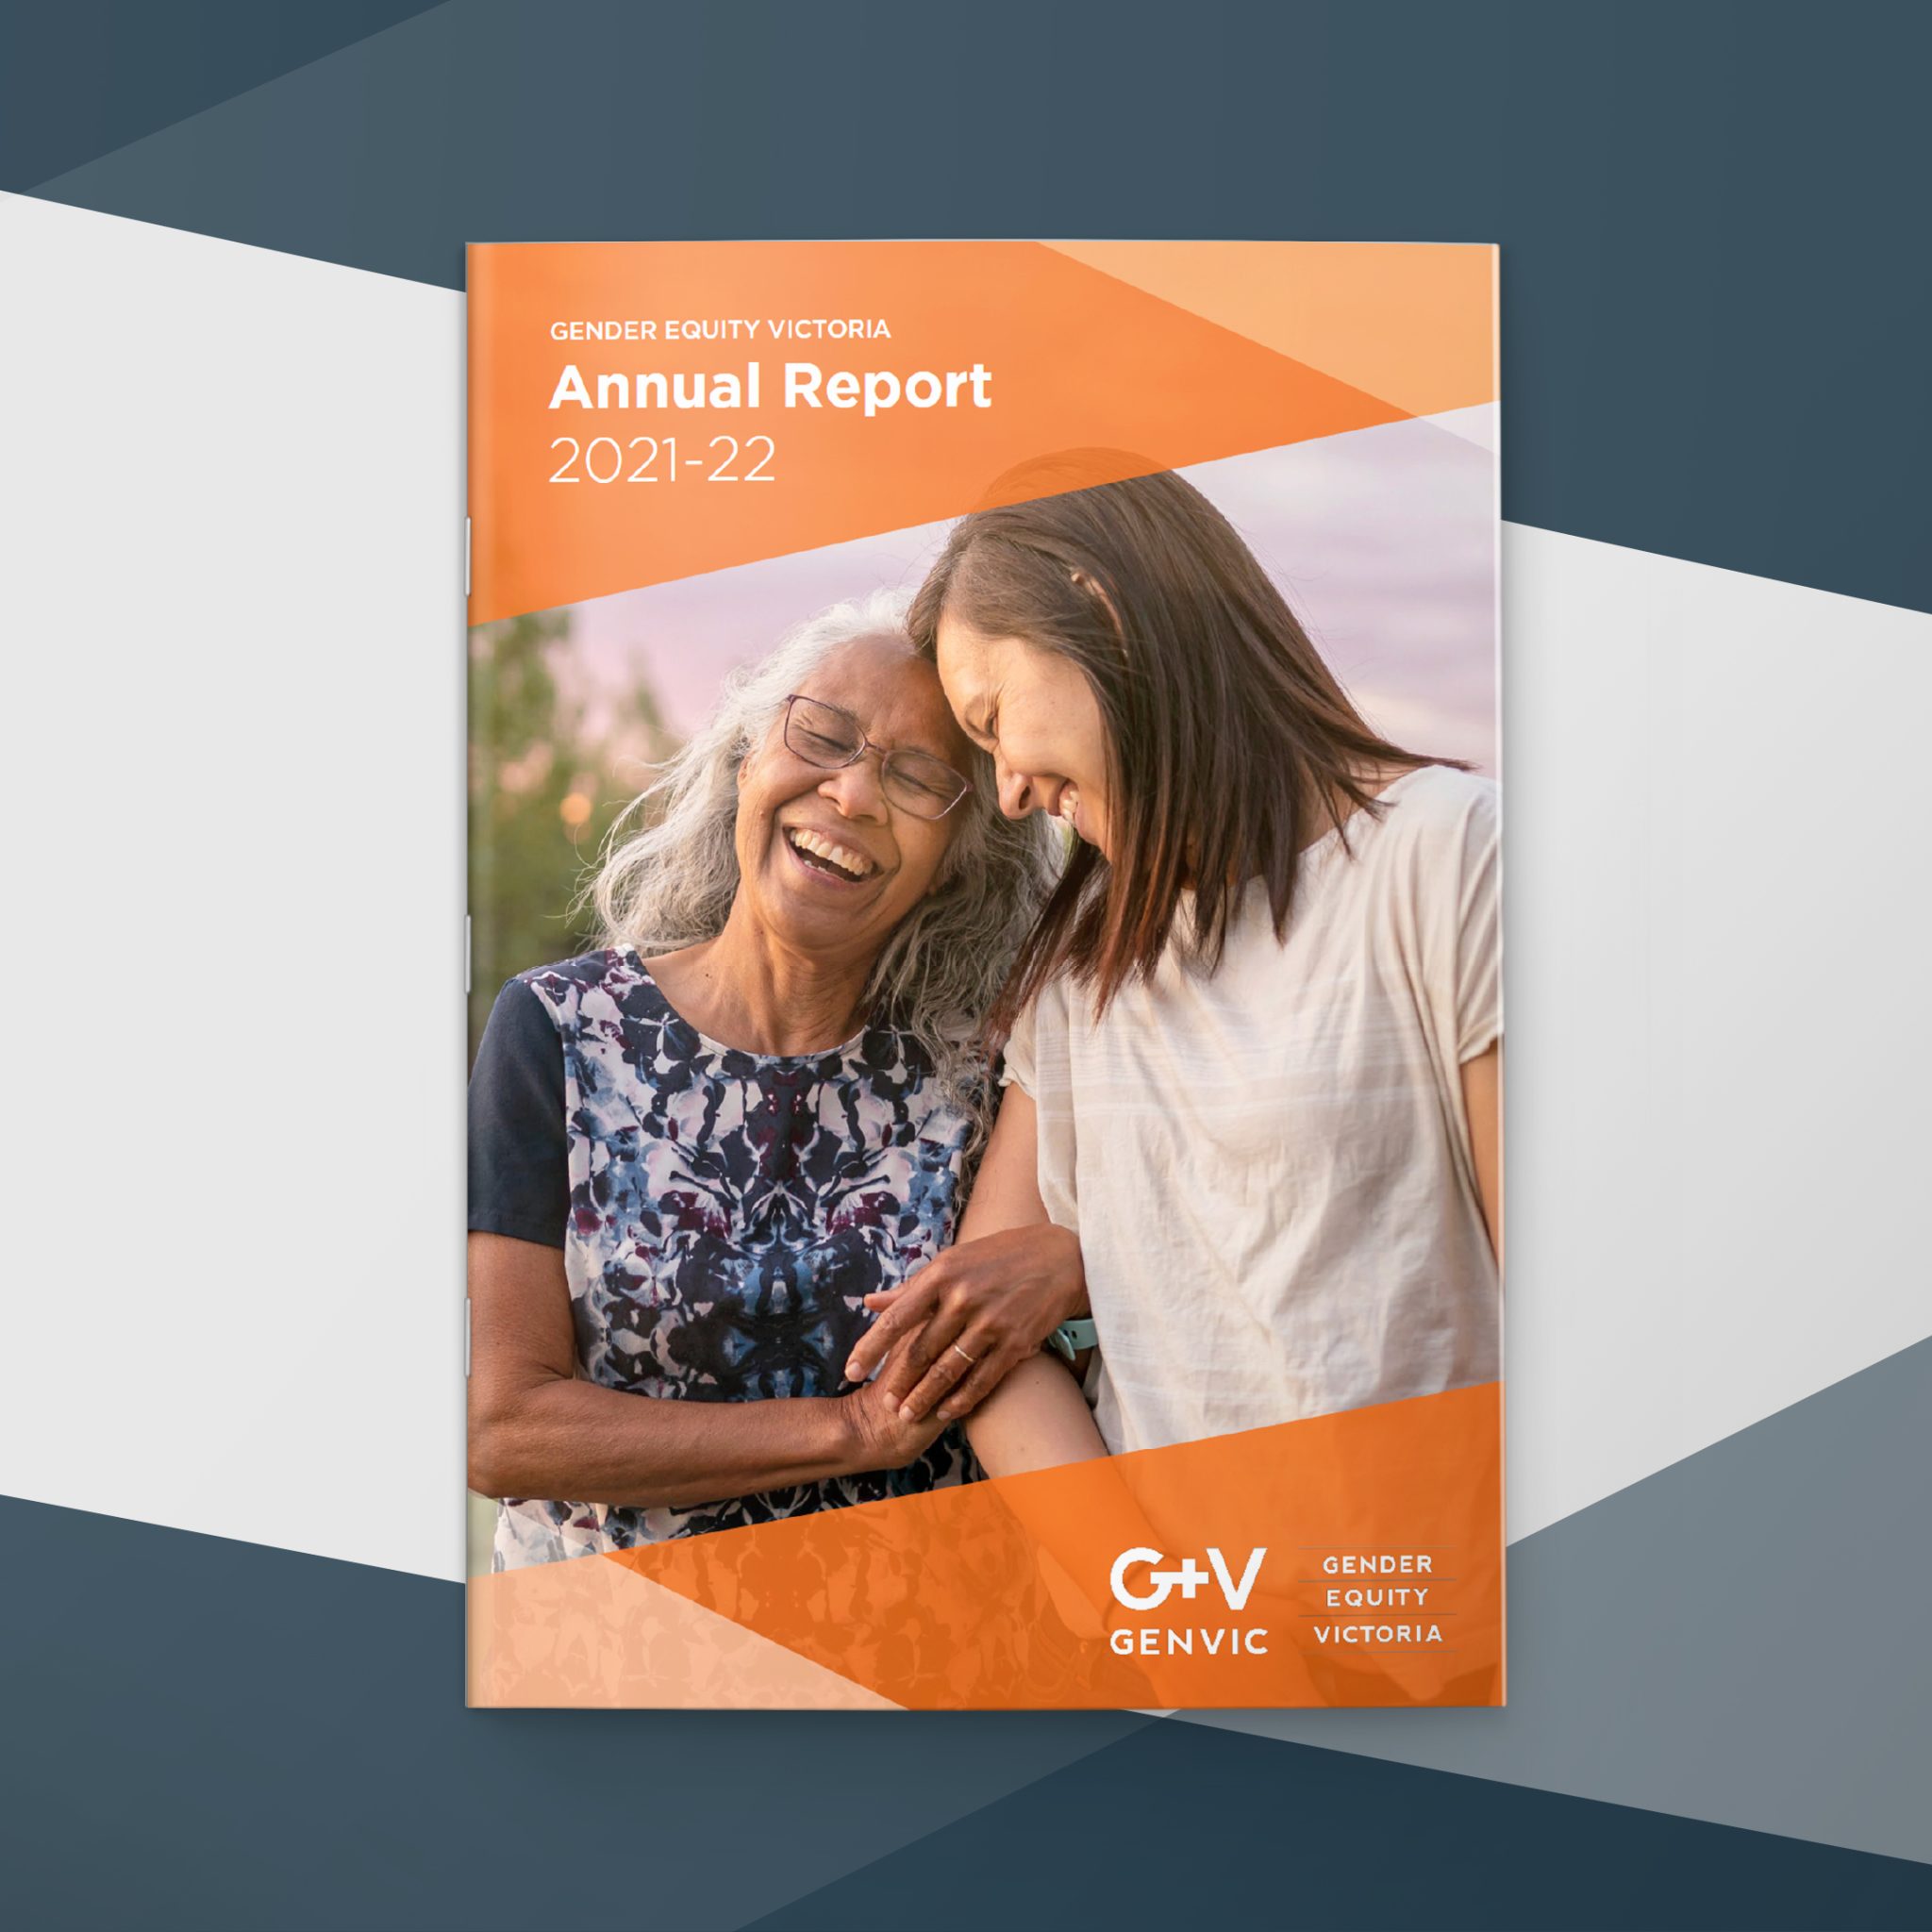 Gender Equity Victoria's 2022 Annual Report cover mockup